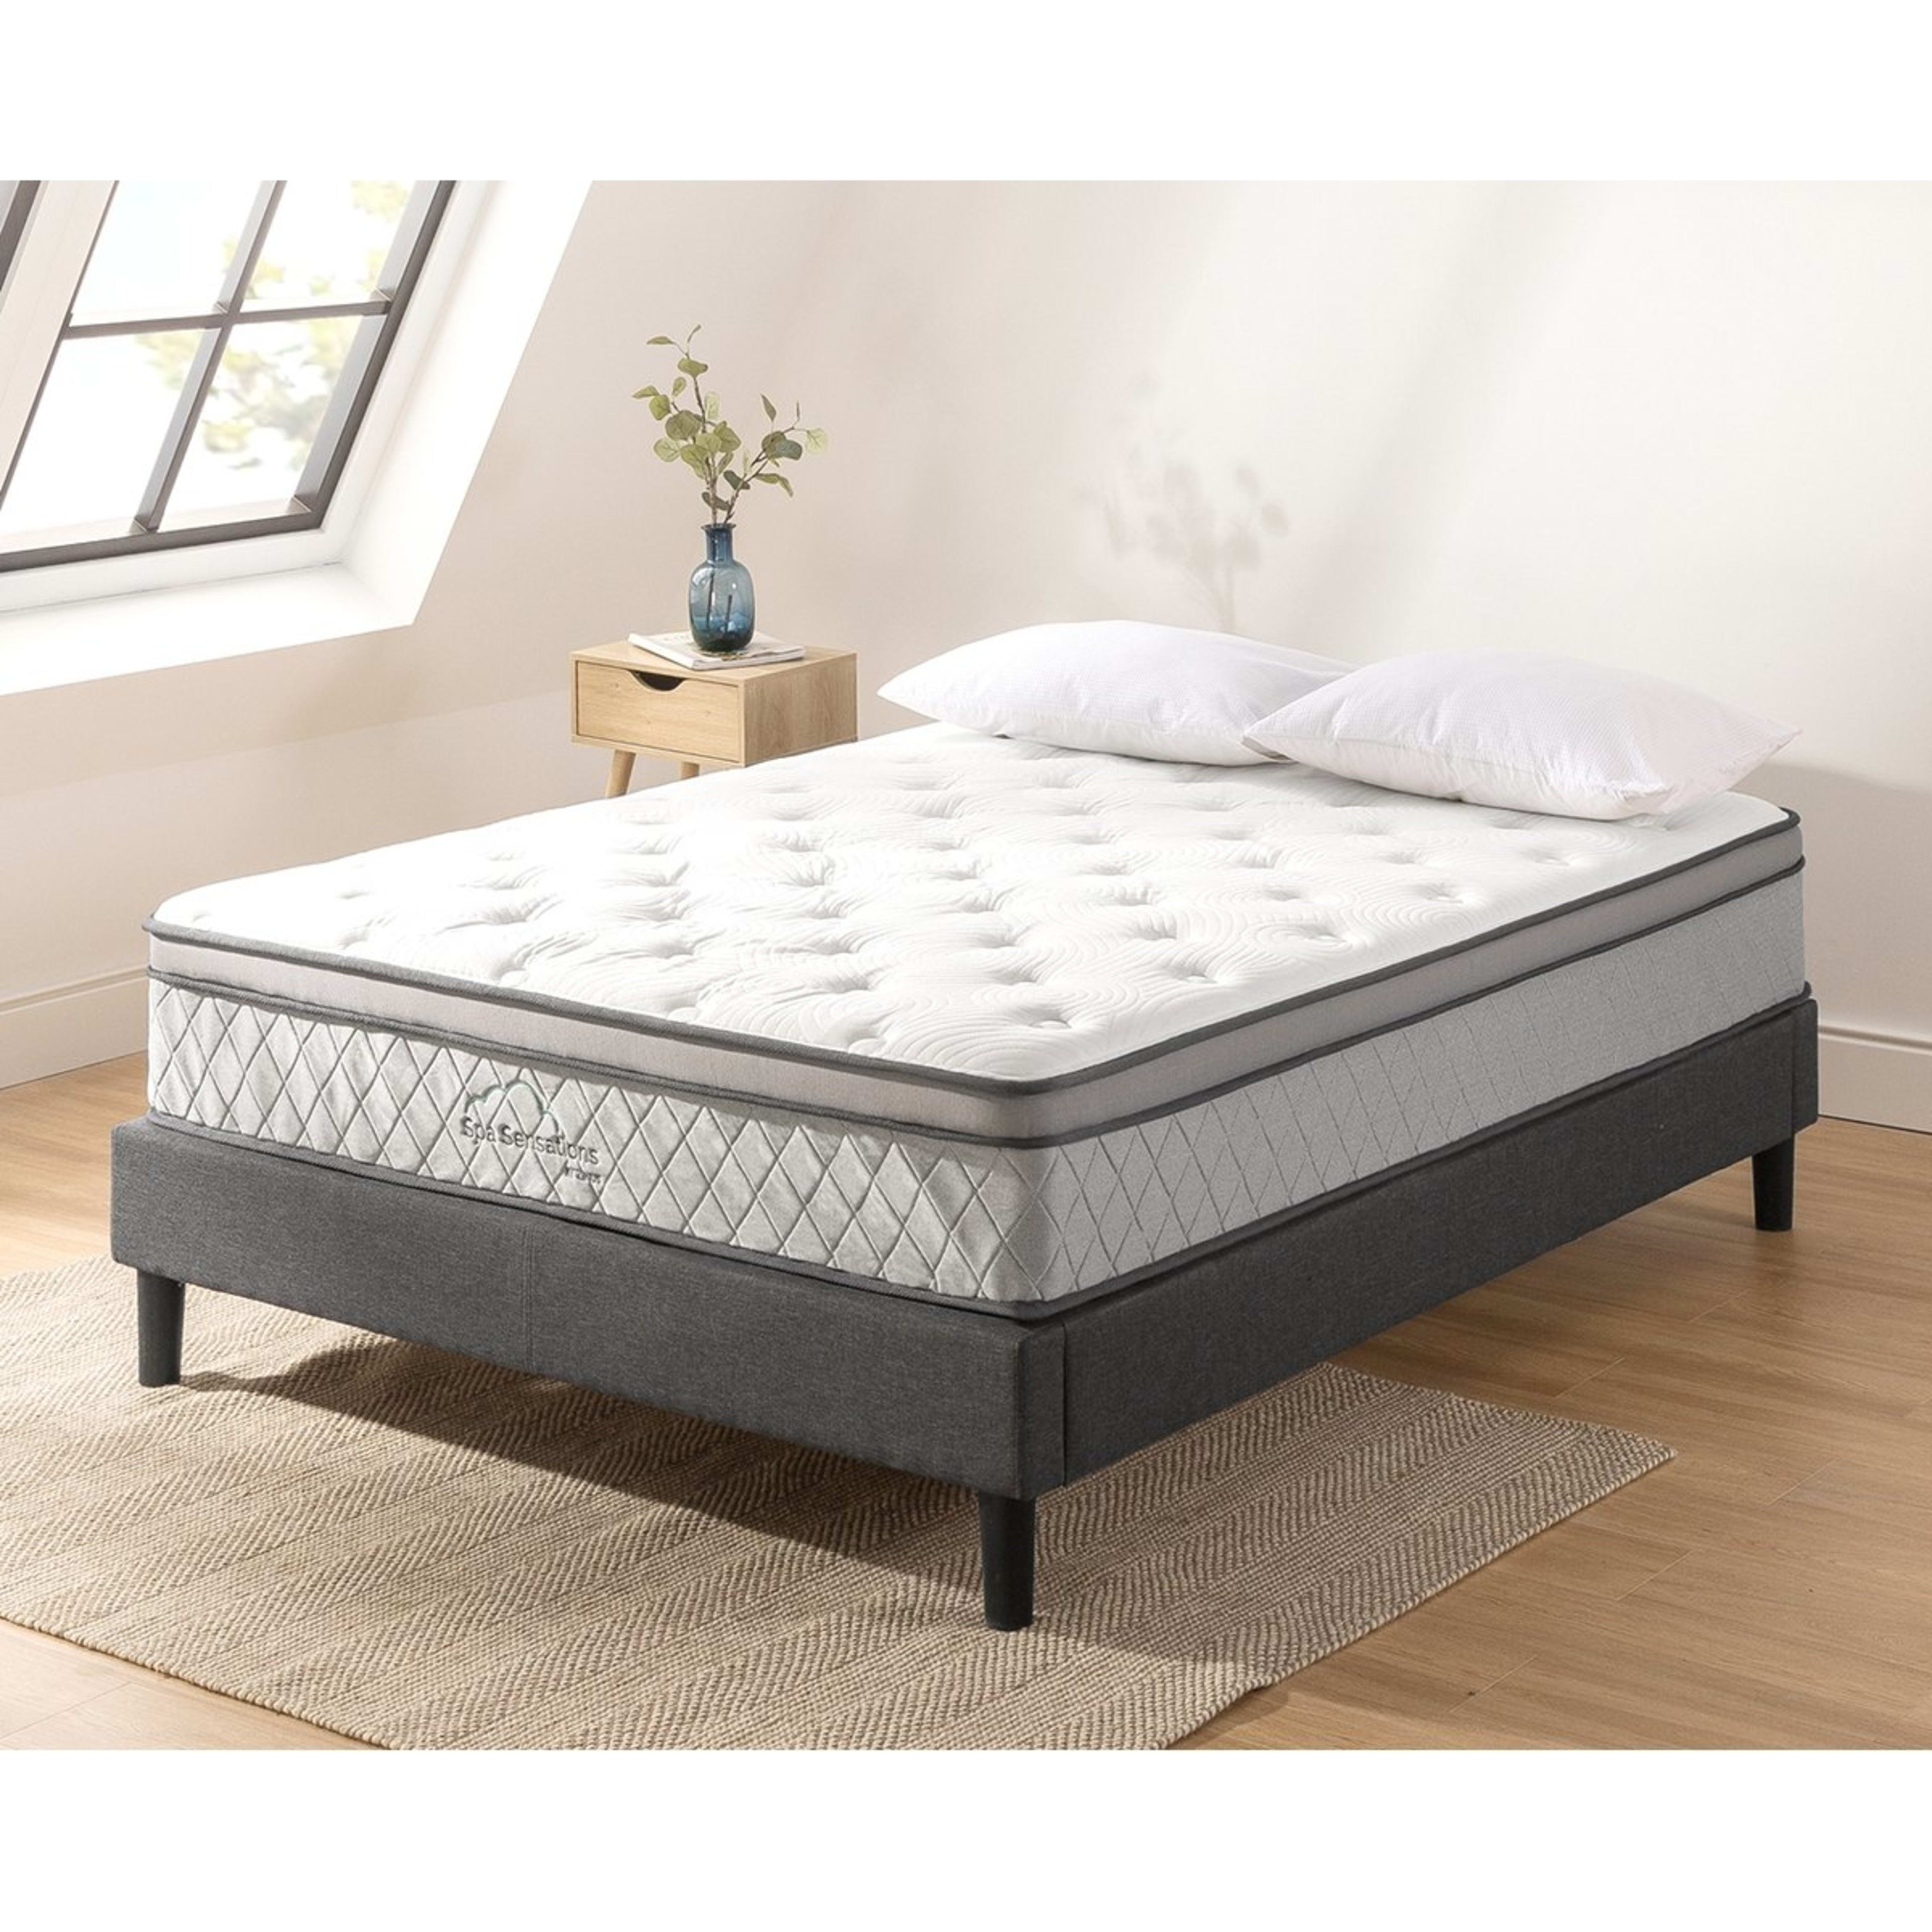 Double Bed Euro Top Pocket Spring Mattress